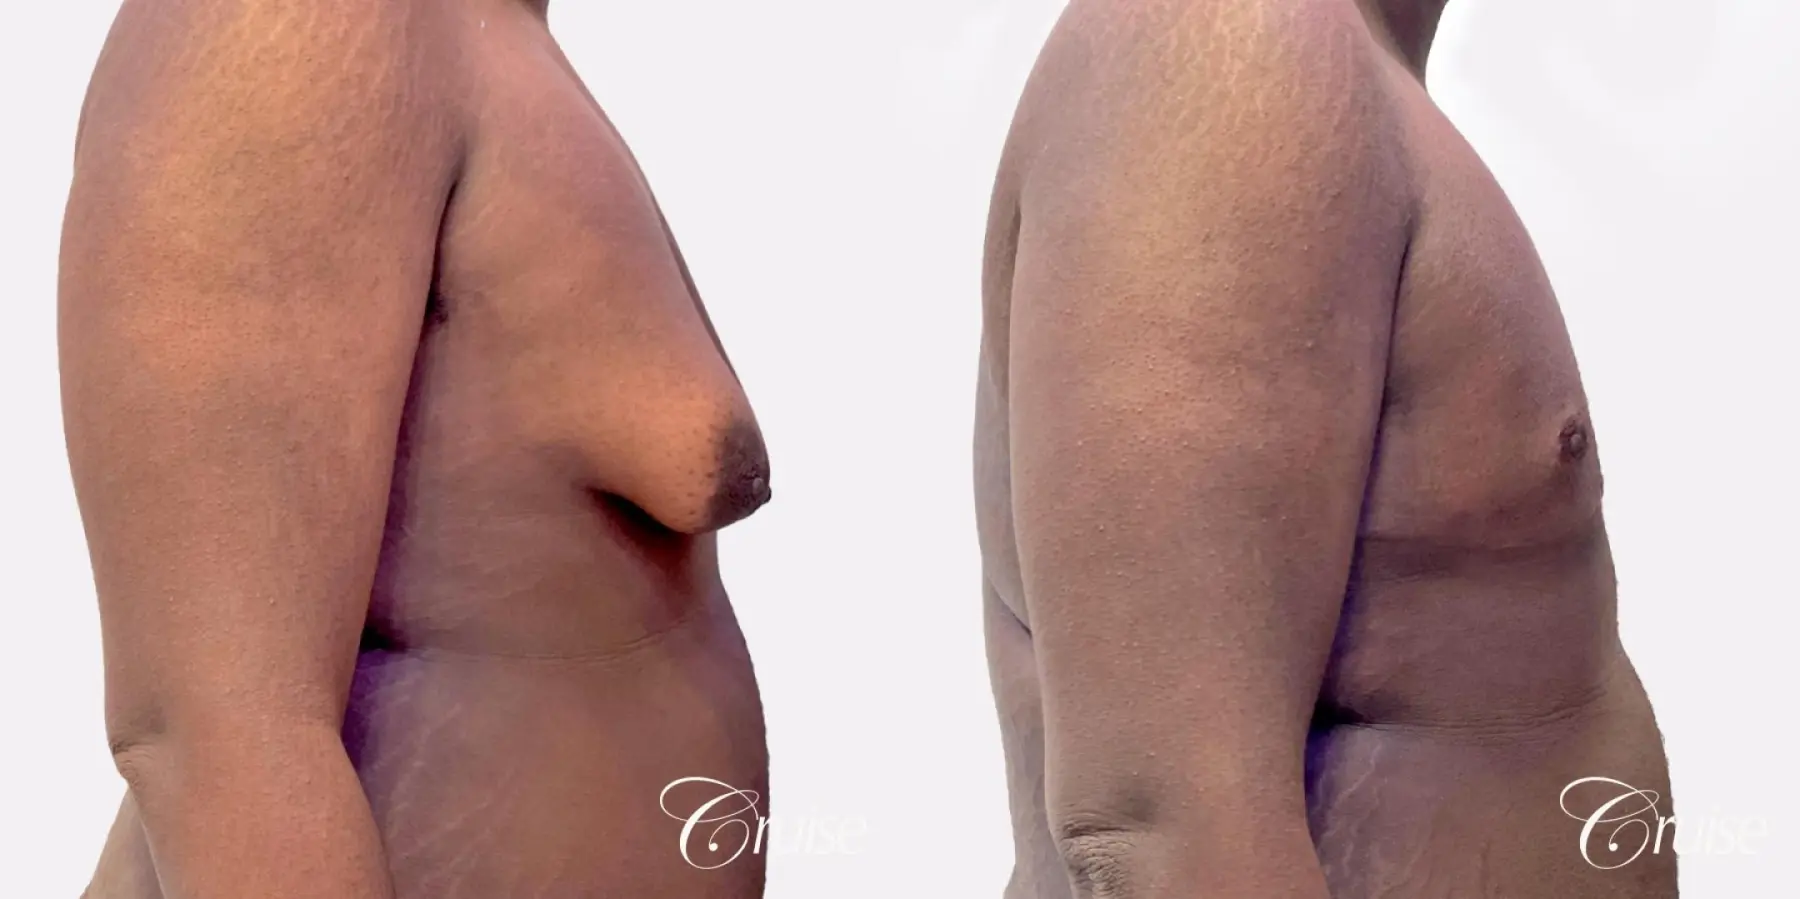 Gynecomastia Type 4 - Before and After 2